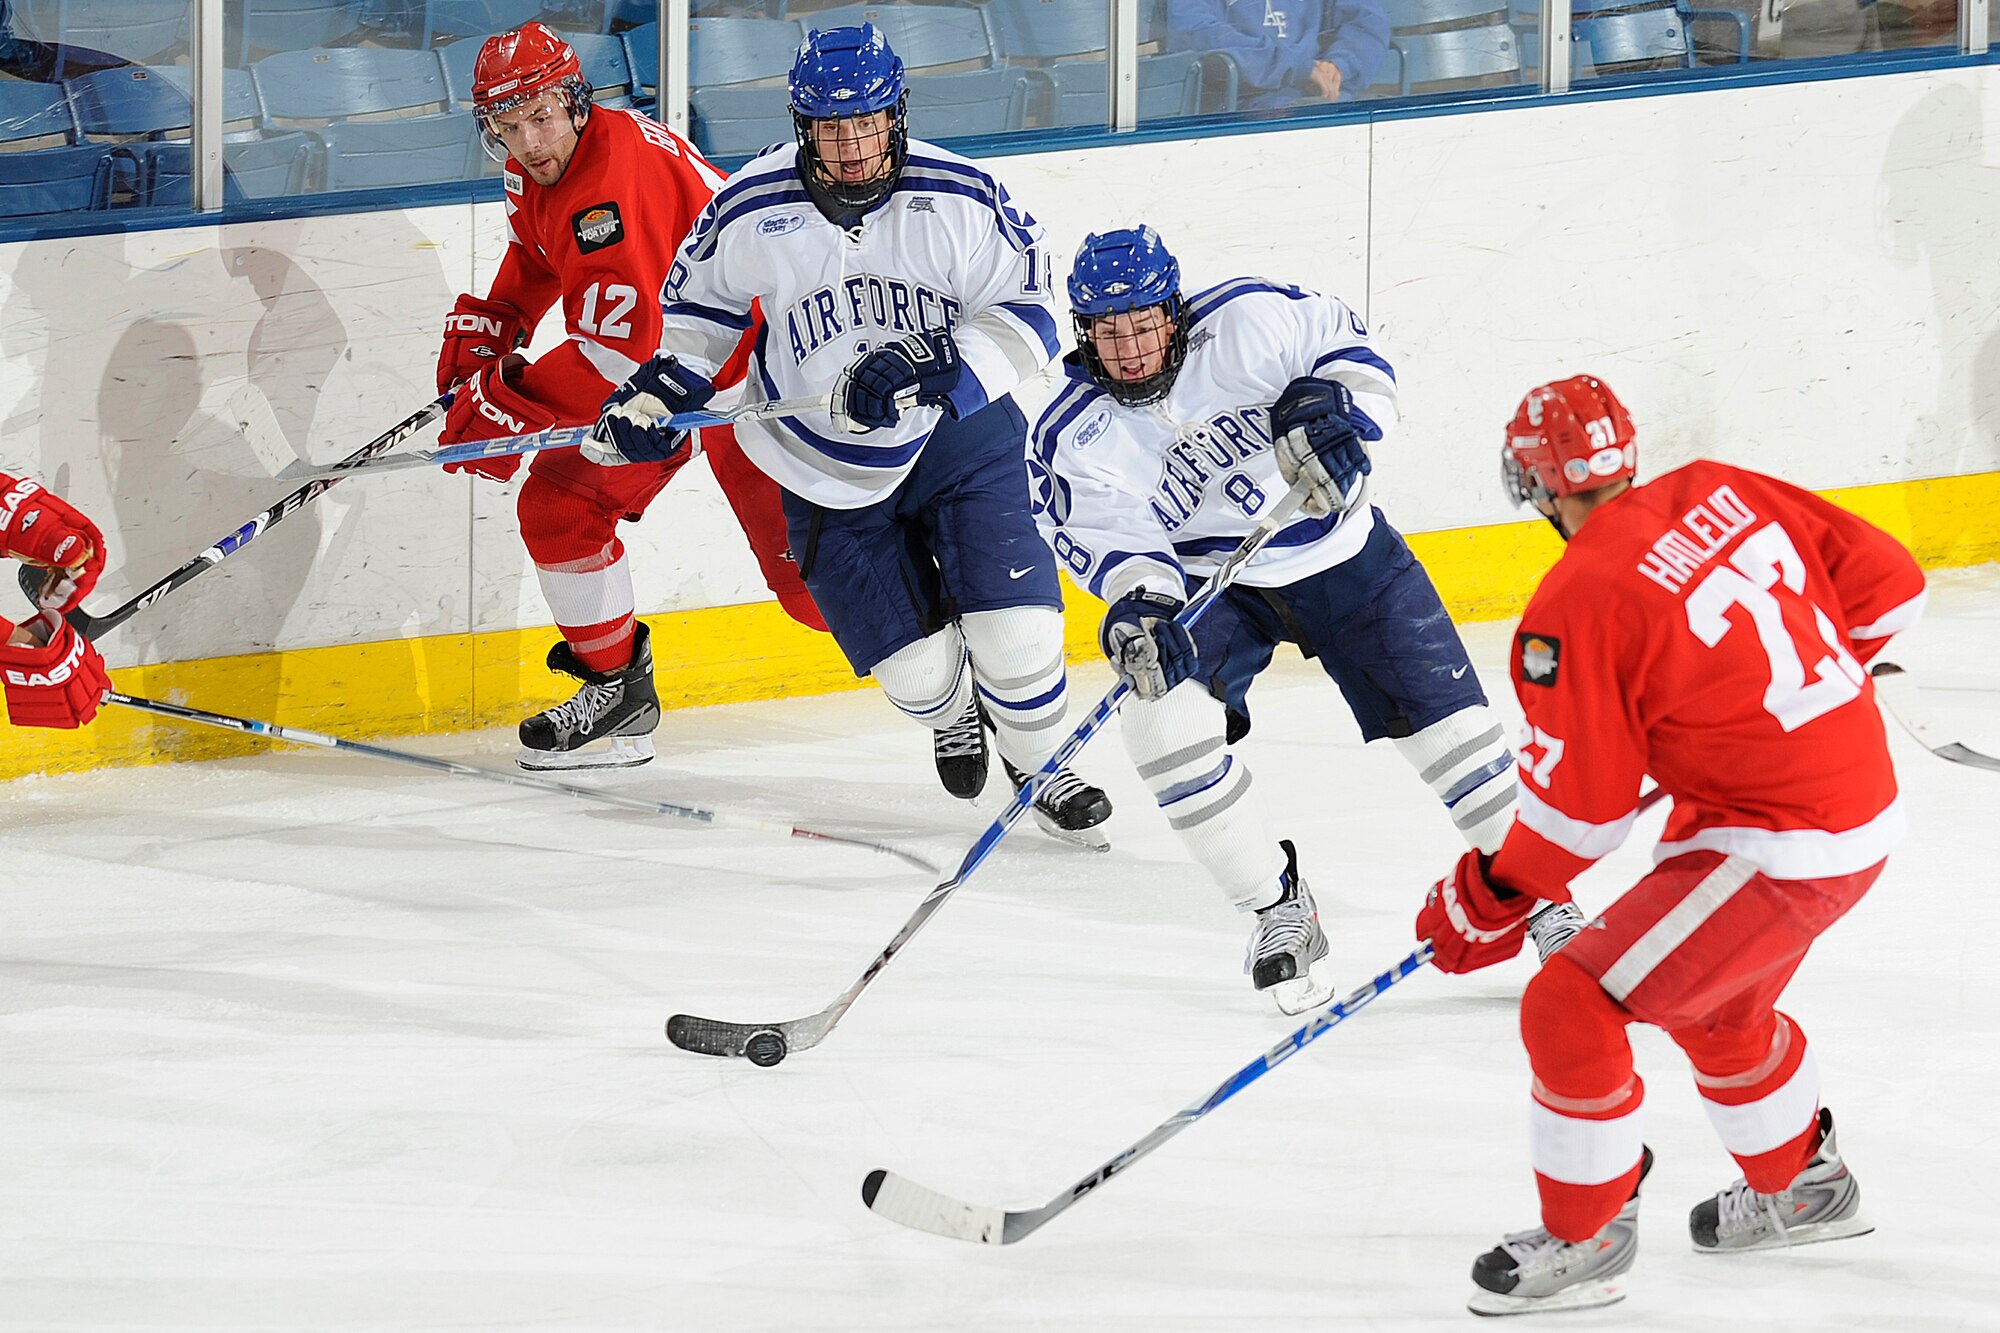 Air Force junior forward Scott Kozlak tries to outmaneuver Calgary defender Dustin Hatlelid during the Falcons-Dinos exhibition game at the Cadet Ice Arena Oct. 5, 2009. The Falcons won the match on two goals by junior forward Jacques Lamoureux. Kozlak is a native of Duluth, Minn. (U.S. Air Force photo/Bill Evans)